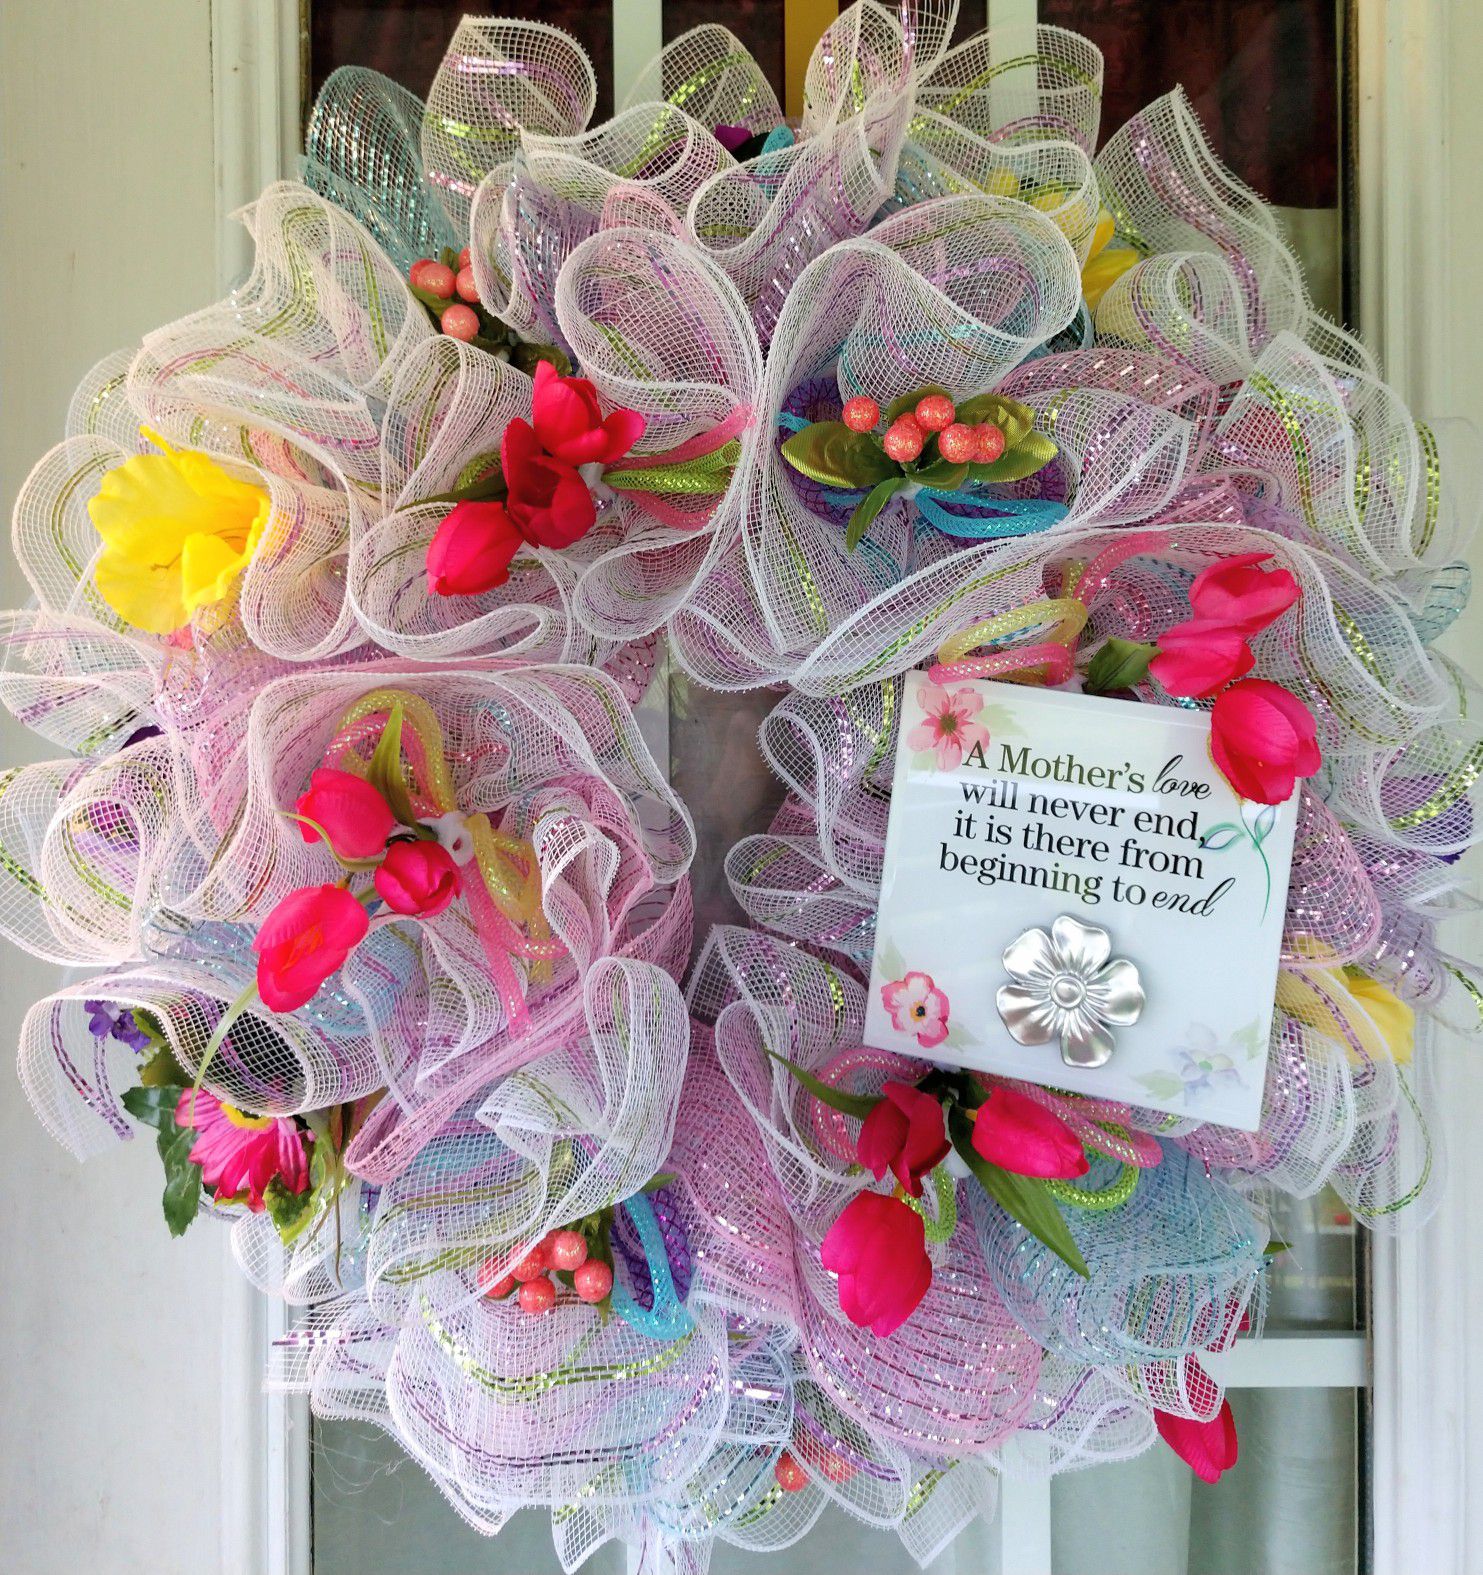 Mothers Day Gift Wreath for Front Door, Spring Wreaths for Front Door, Wreaths for Front Door